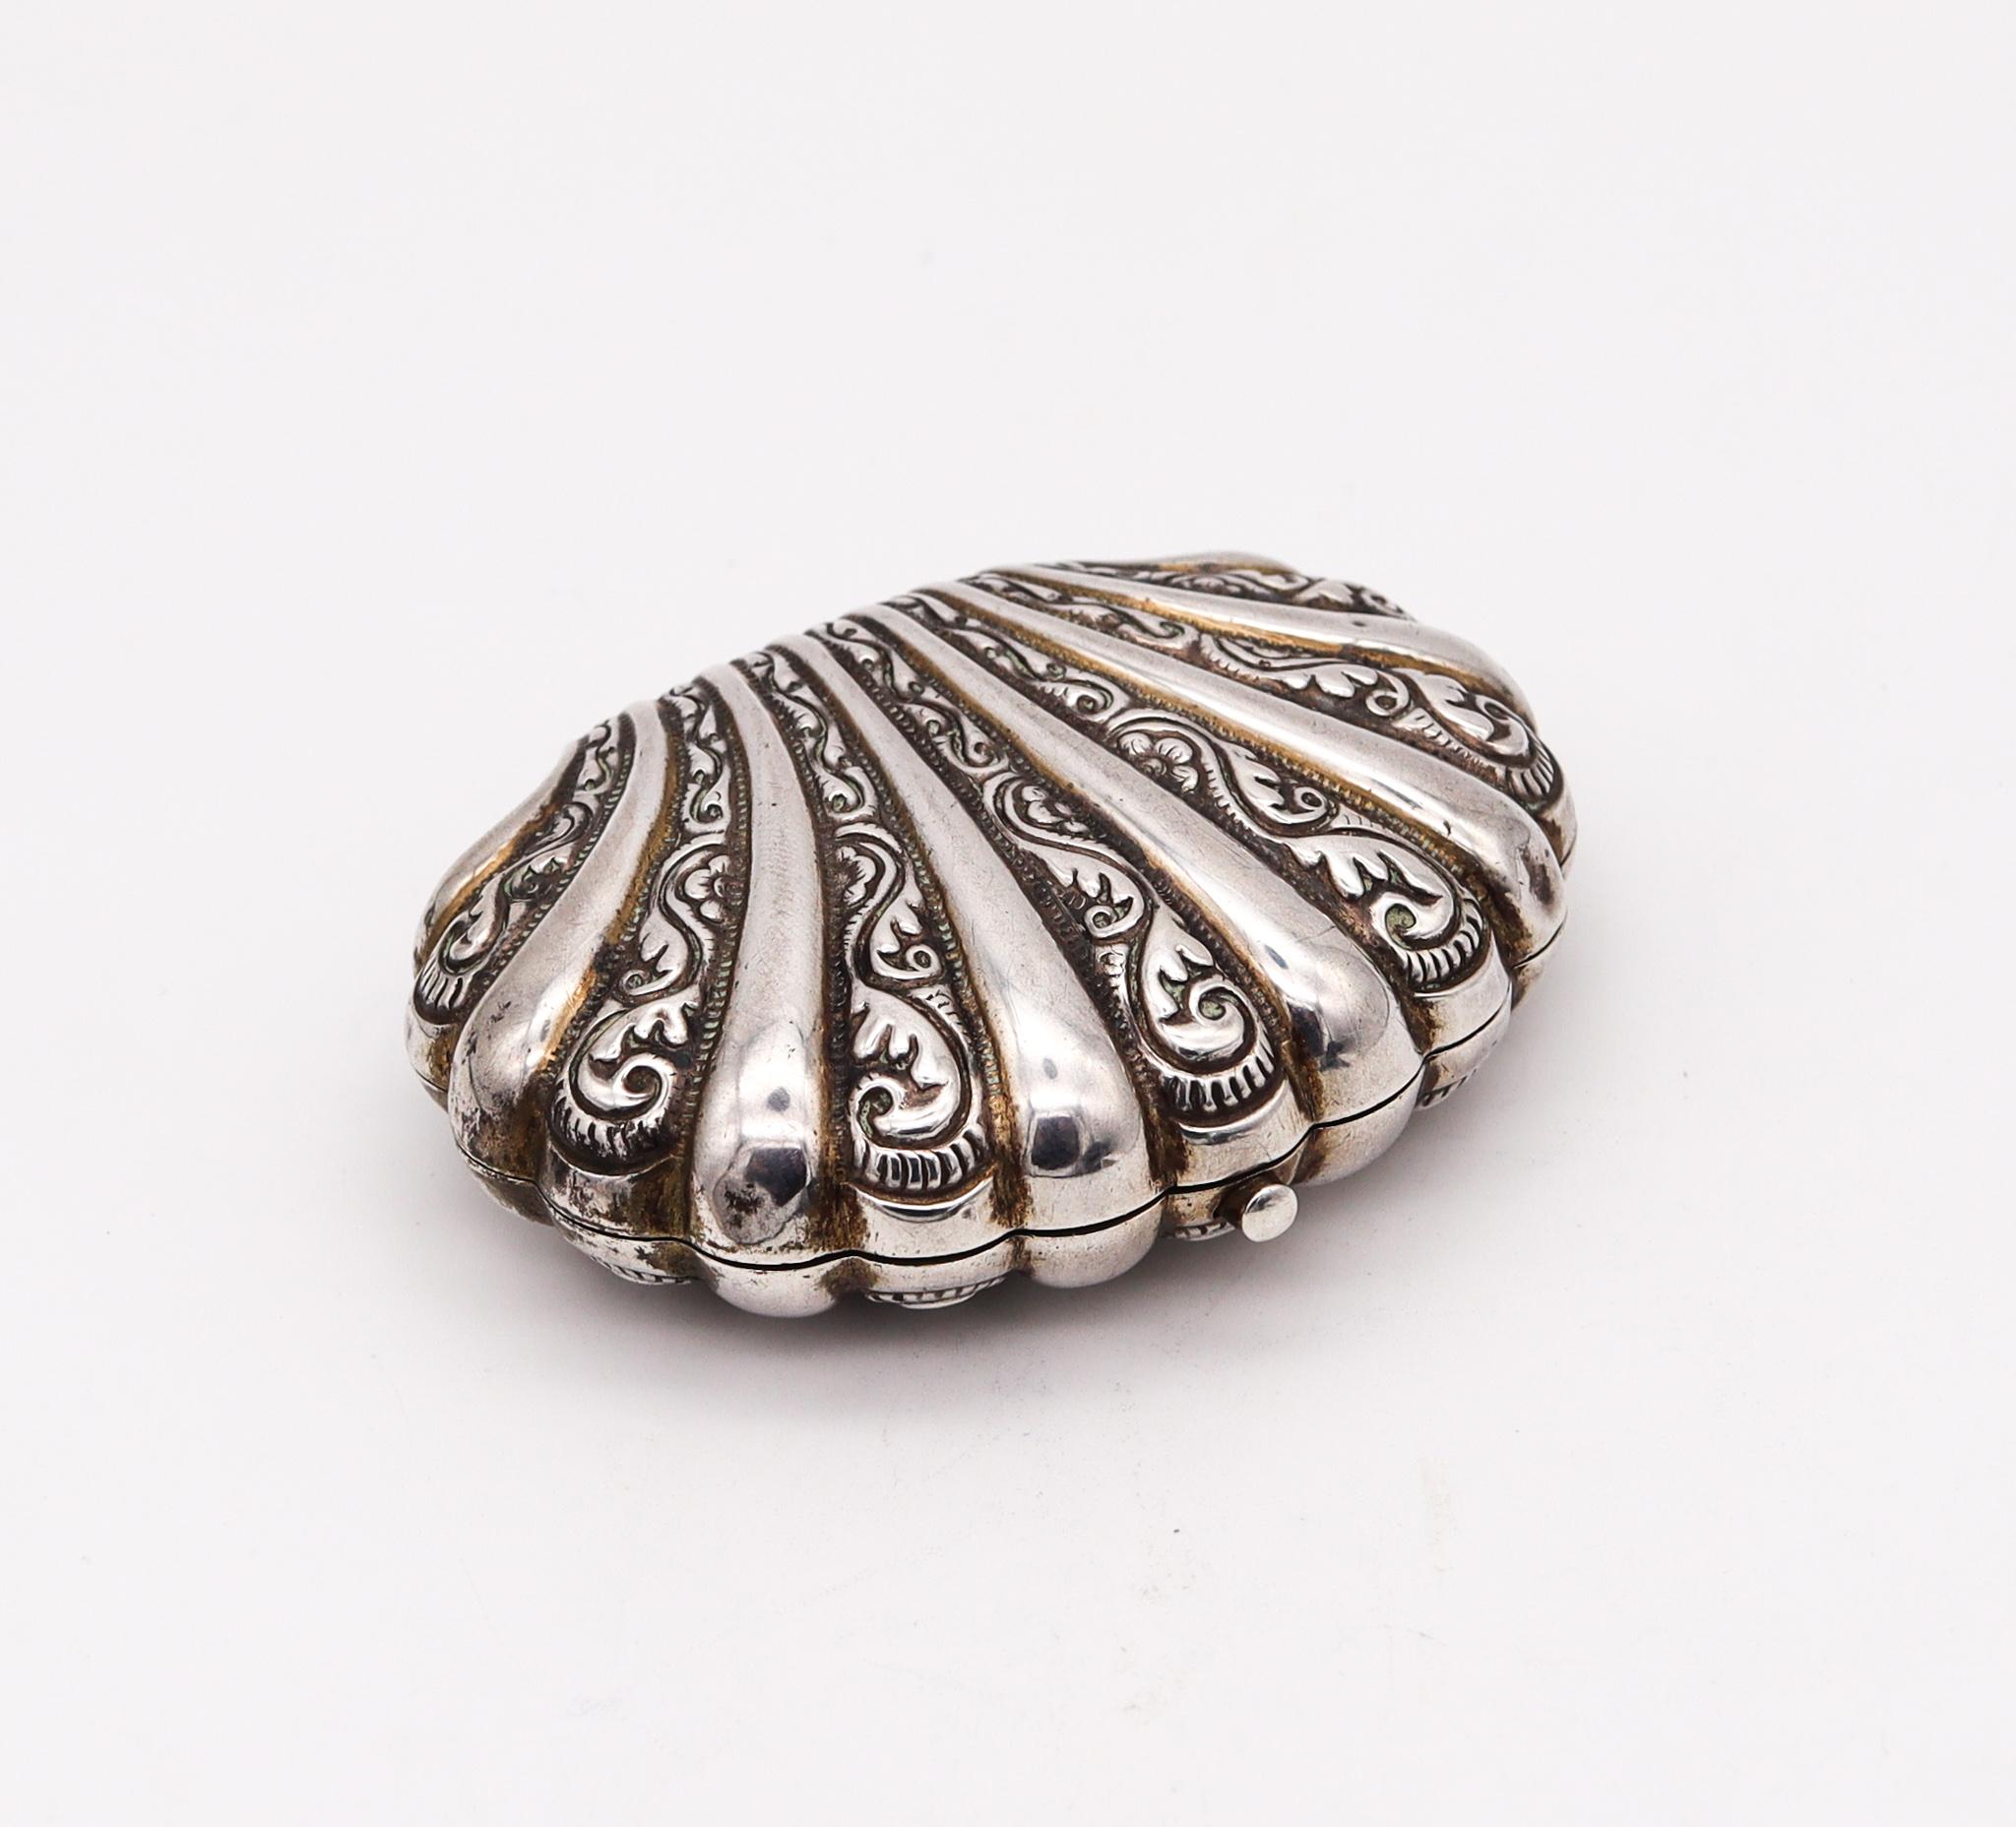 Clam Conch Shaped Coins wallet Purse.

A beautiful piece, created during the late Victorian era (1837-1901) circa 1900. This is a coins wallet crafted in the shape of a clam conch, in solid silver .900/.999. The interiors has three compartments,